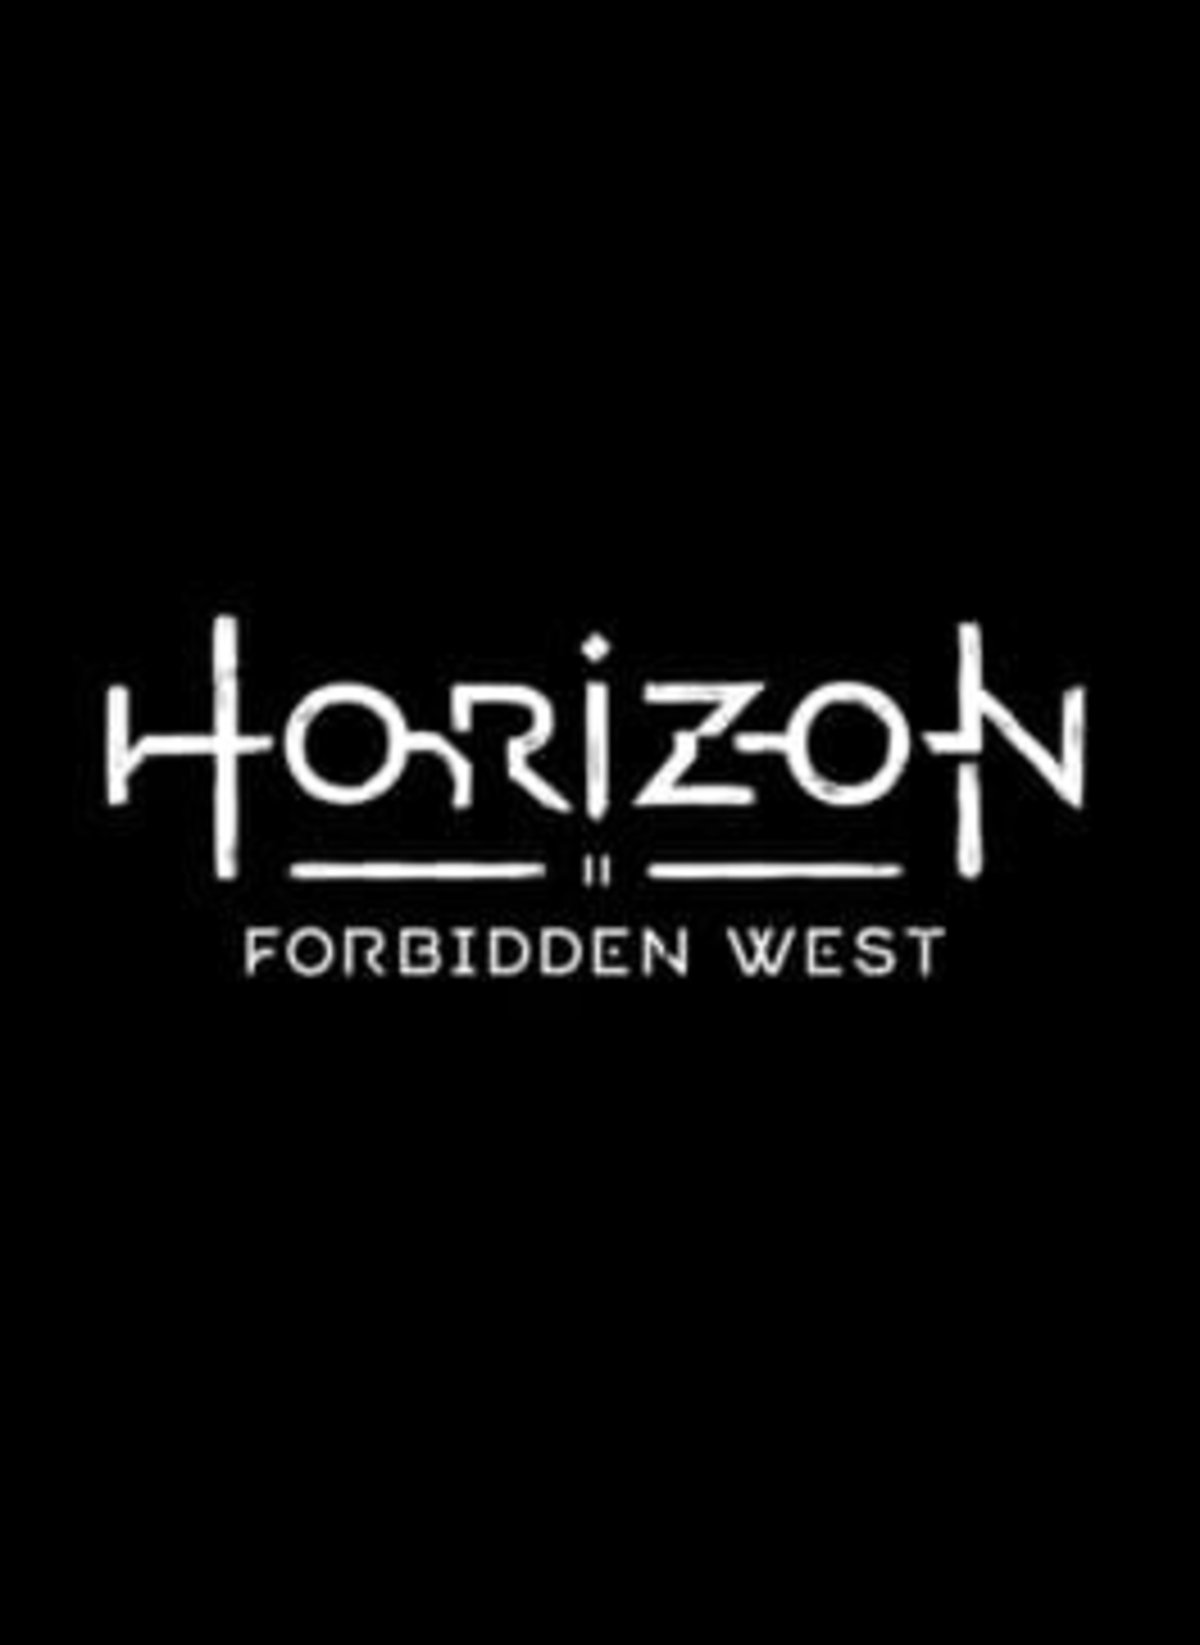 Horizon Forbidden West offers new details and images of its impressive open world